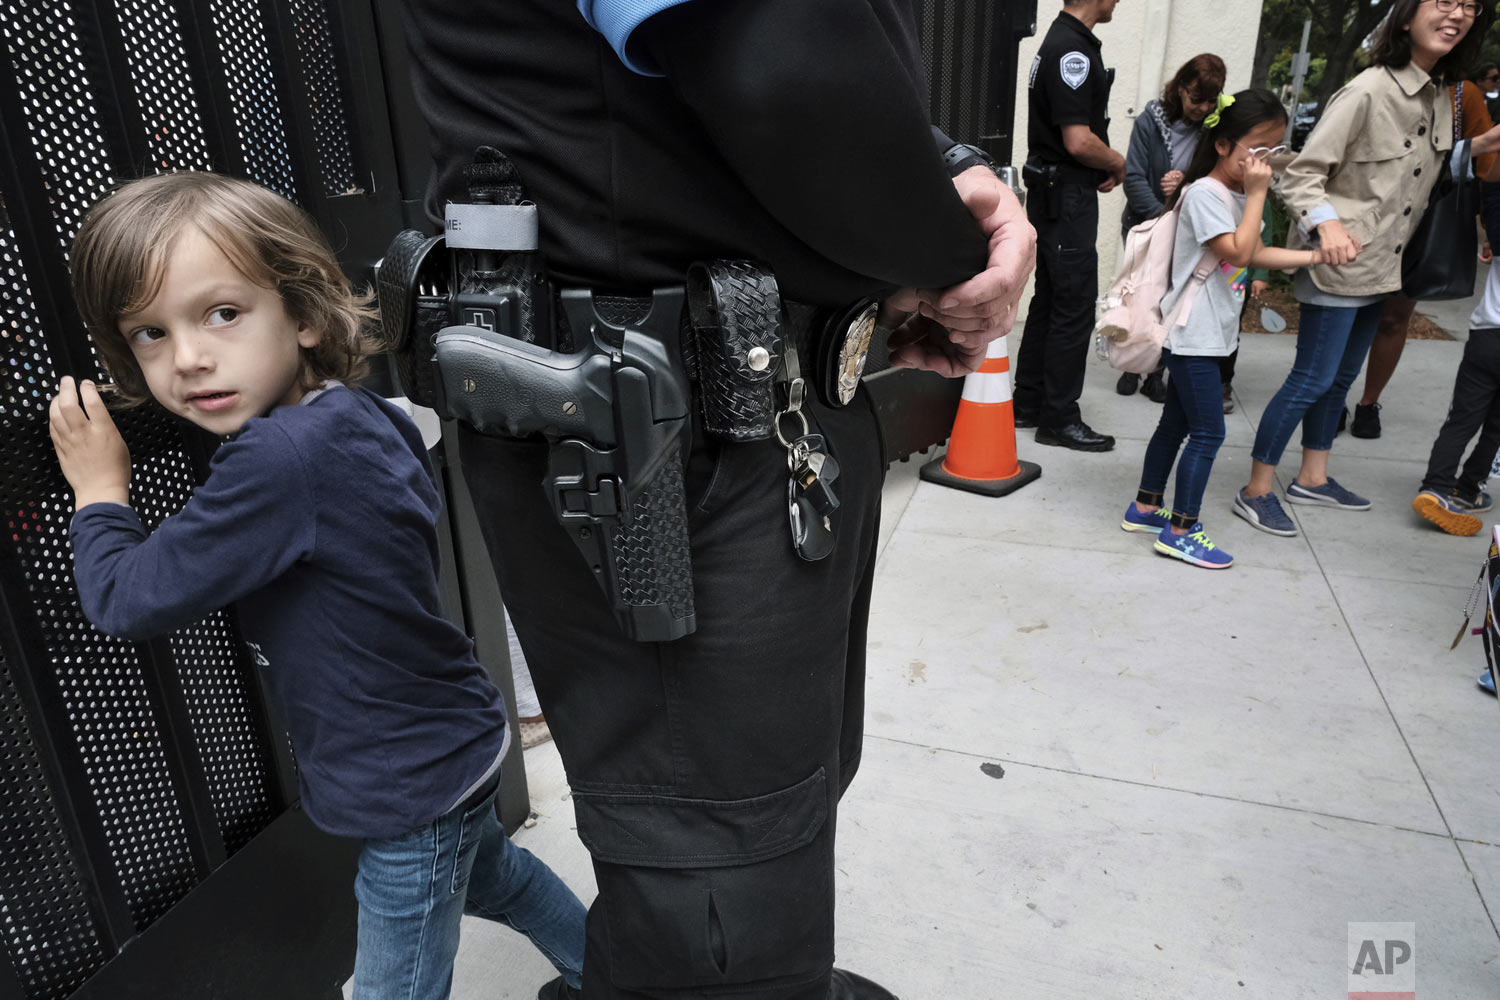  Julian Richner, 9, leaves school for the day to meet his mother as he passes behind an armed security guard at Beverly Hills Unified School District's K-8 Horace Mann School in Beverly Hills, Calif. on Monday, May 13, 2019. Districts nationwide are 